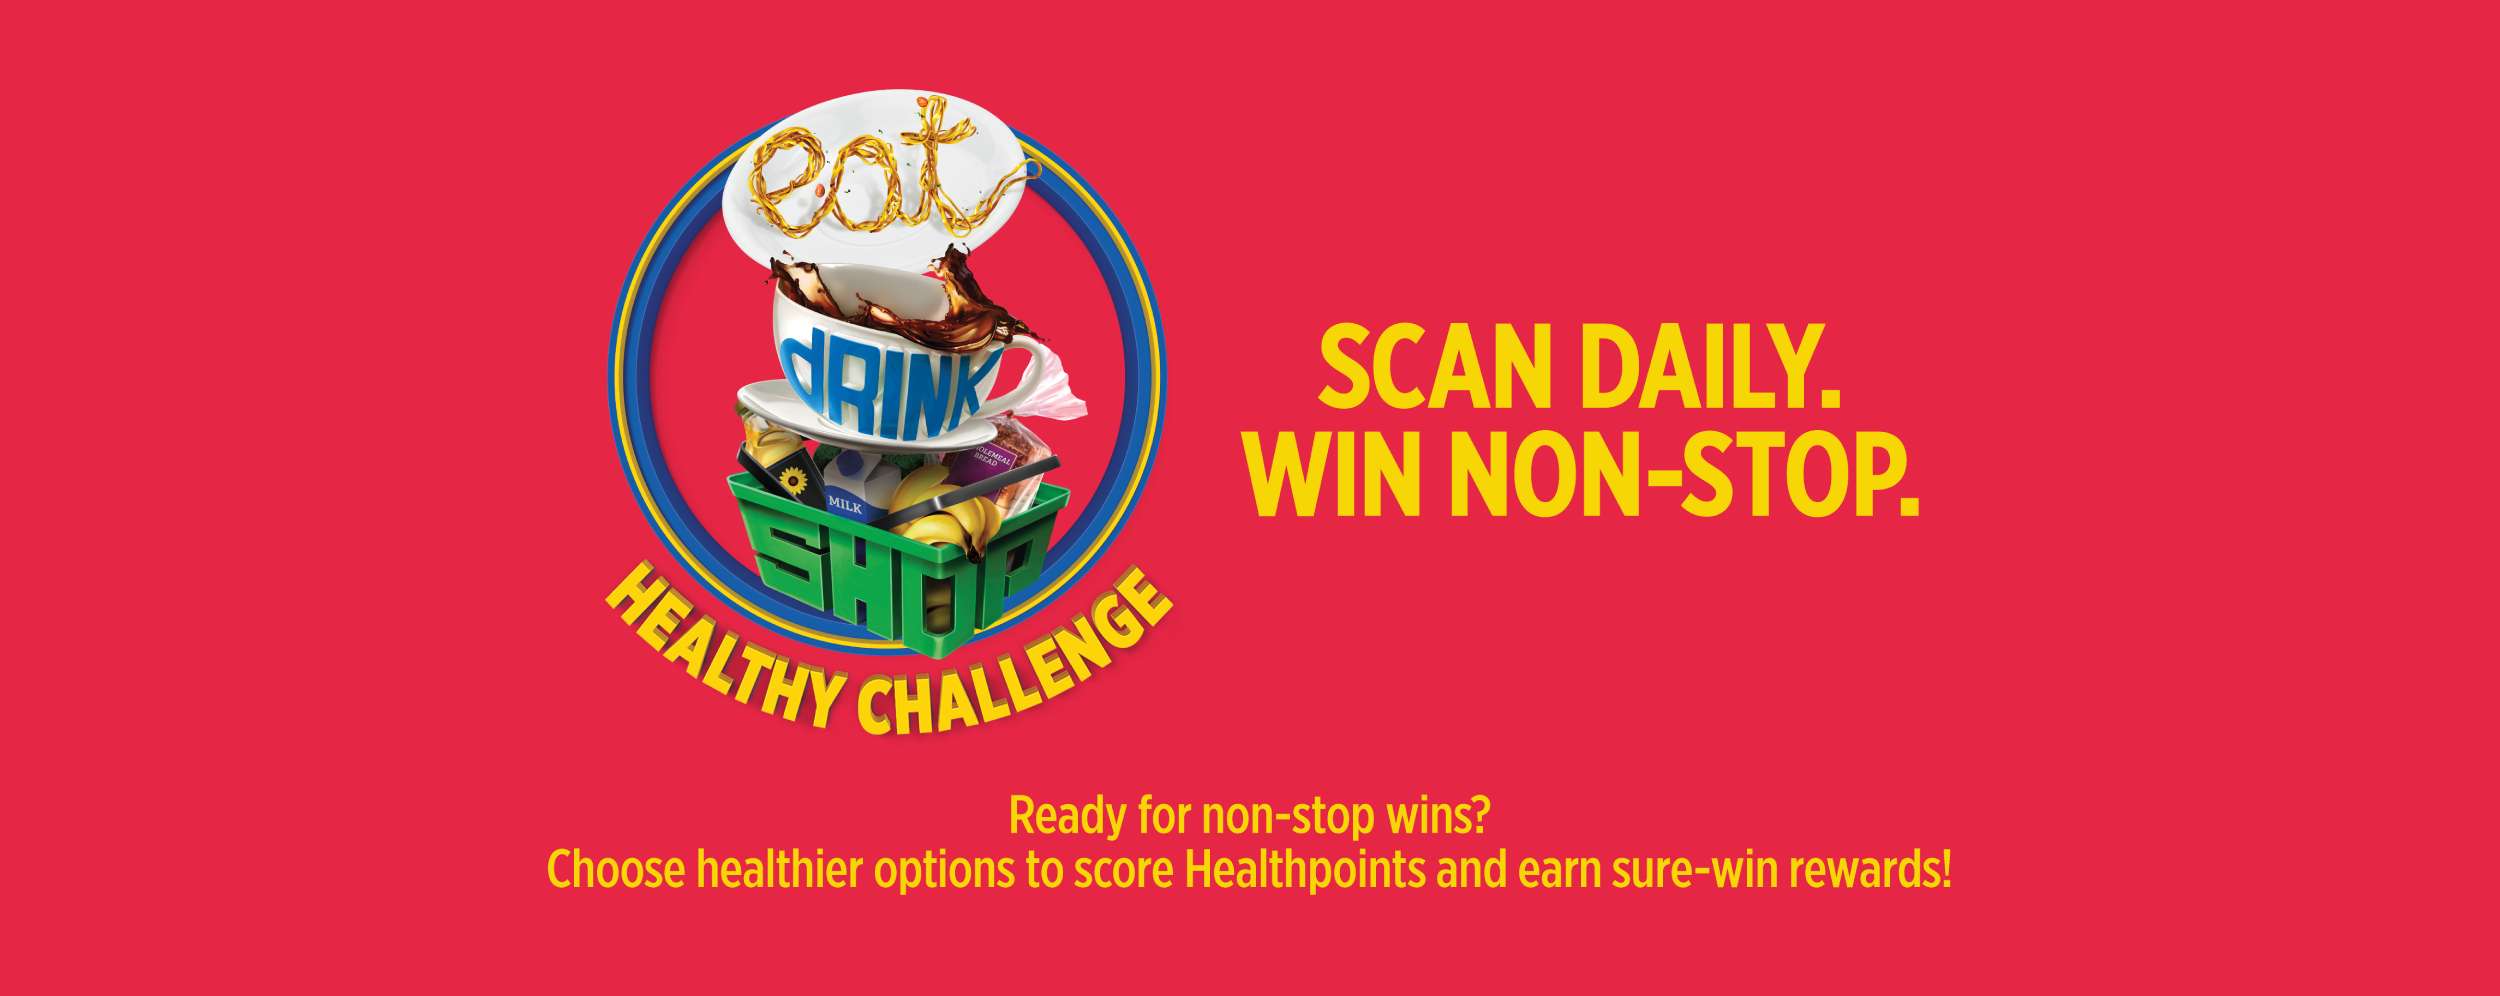 SCAN DAILY. WIN NON-STOP.